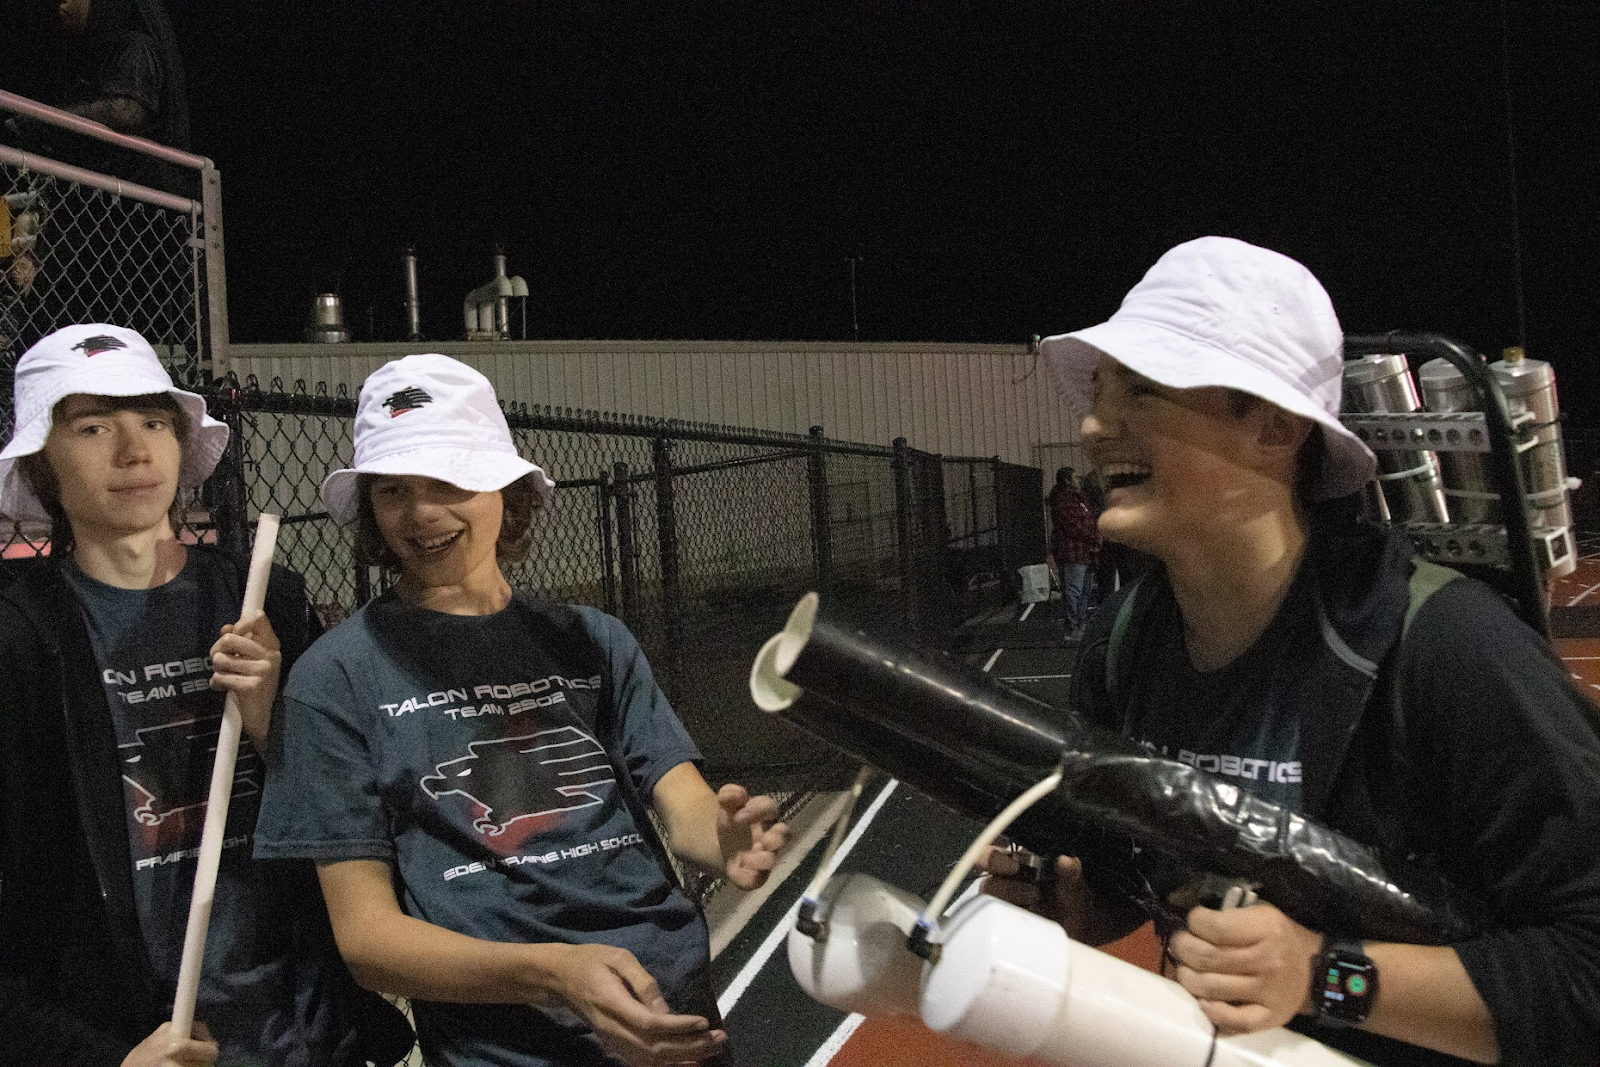 Three talon team members laughing with each other on the feild.